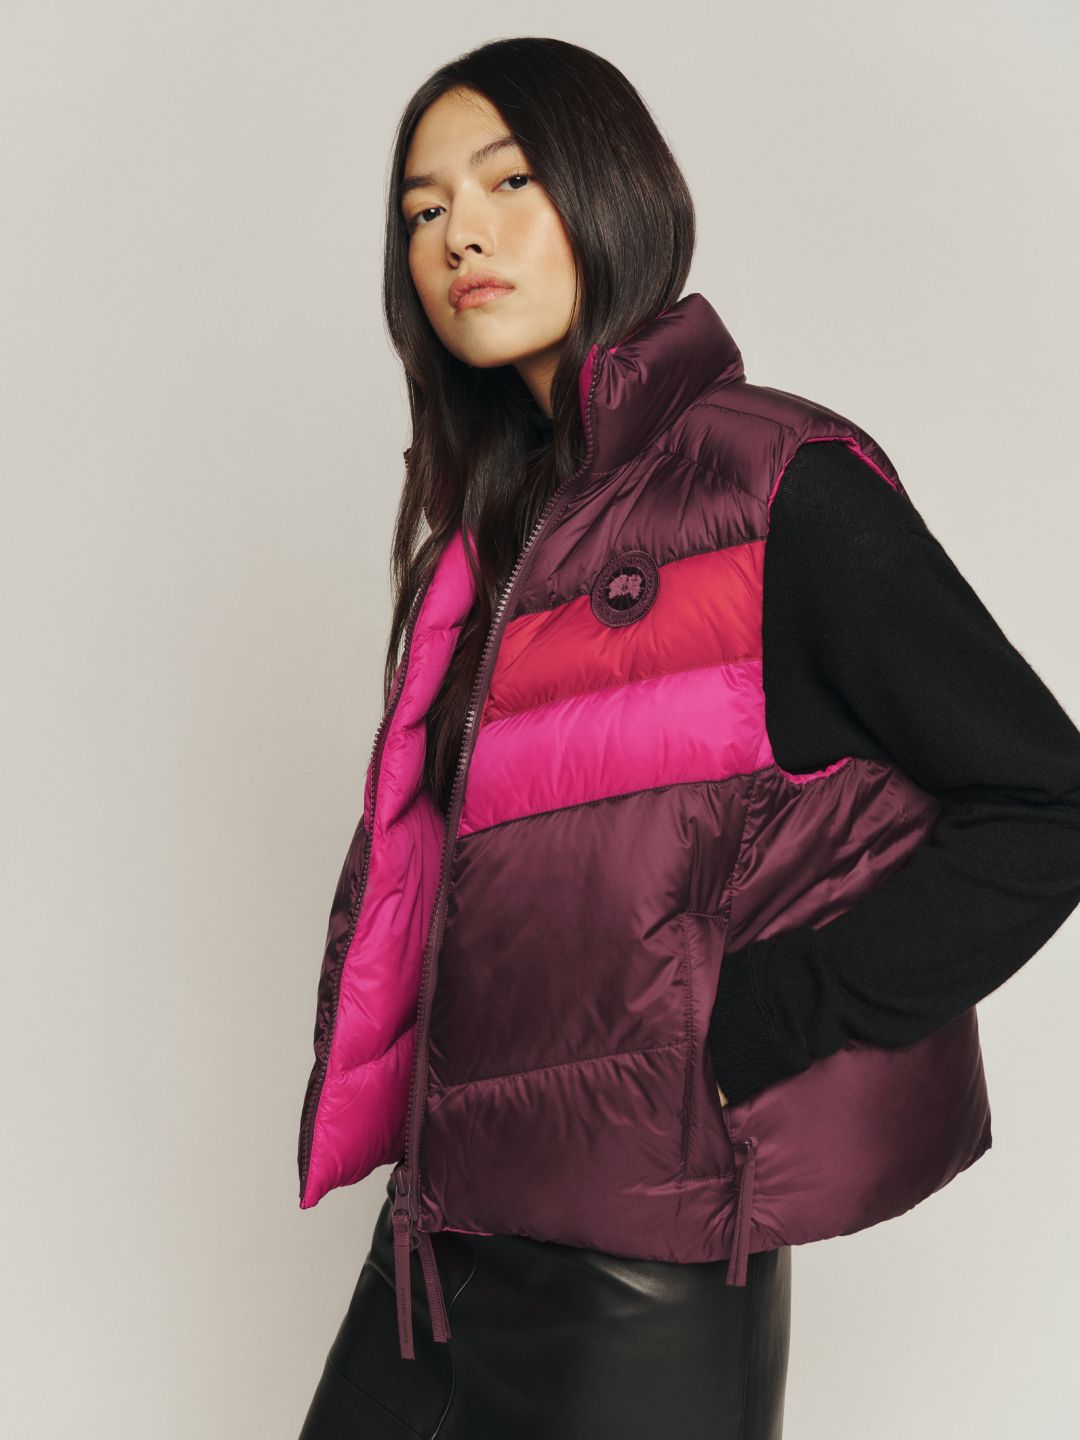 Reformation and Canada Goose Collaborated on Après-Ski﻿ Outerwear